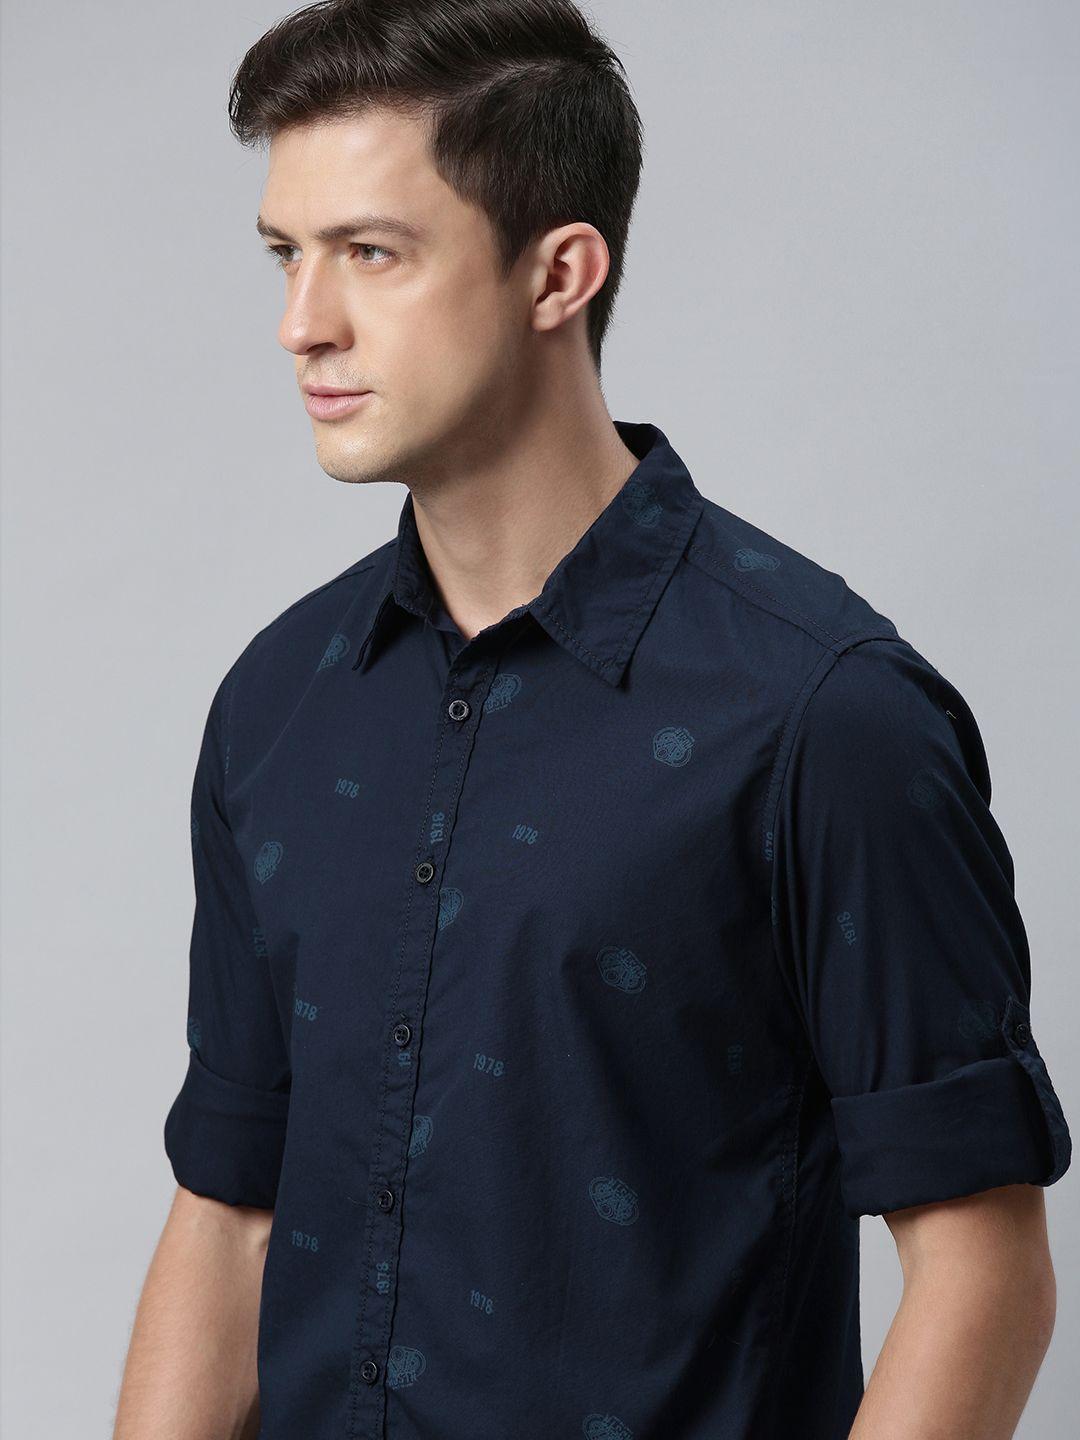 the roadster lifestyle co men navy blue printed casual shirt